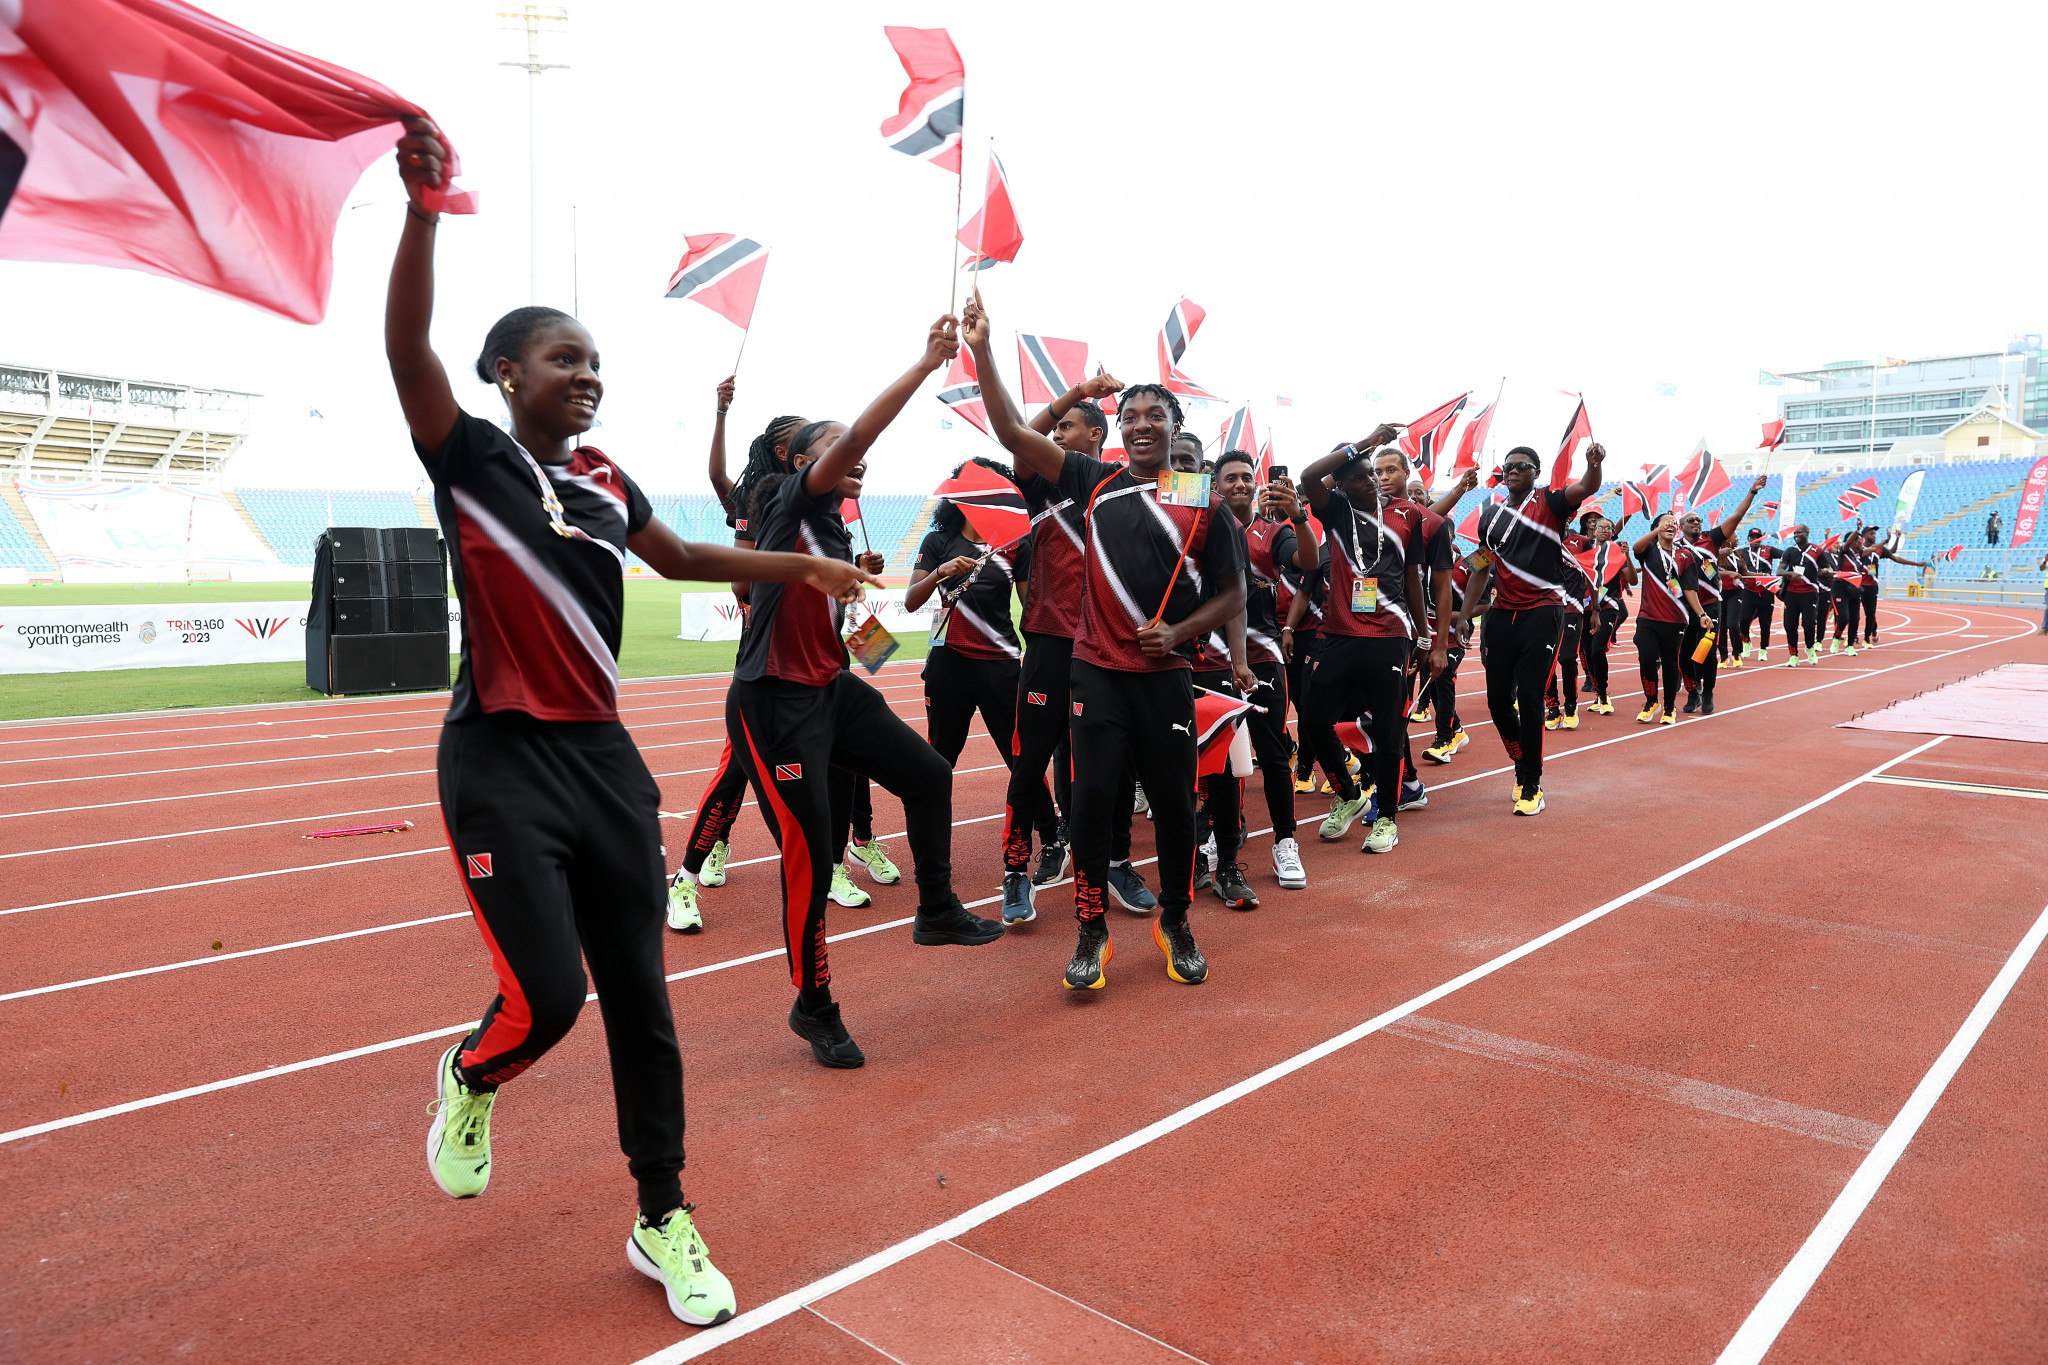 The Commonwealth Youth Games, taking place in Trinidad and Tobago, has been officially opened ©Getty Images (Image obtained at insidethegames.biz)